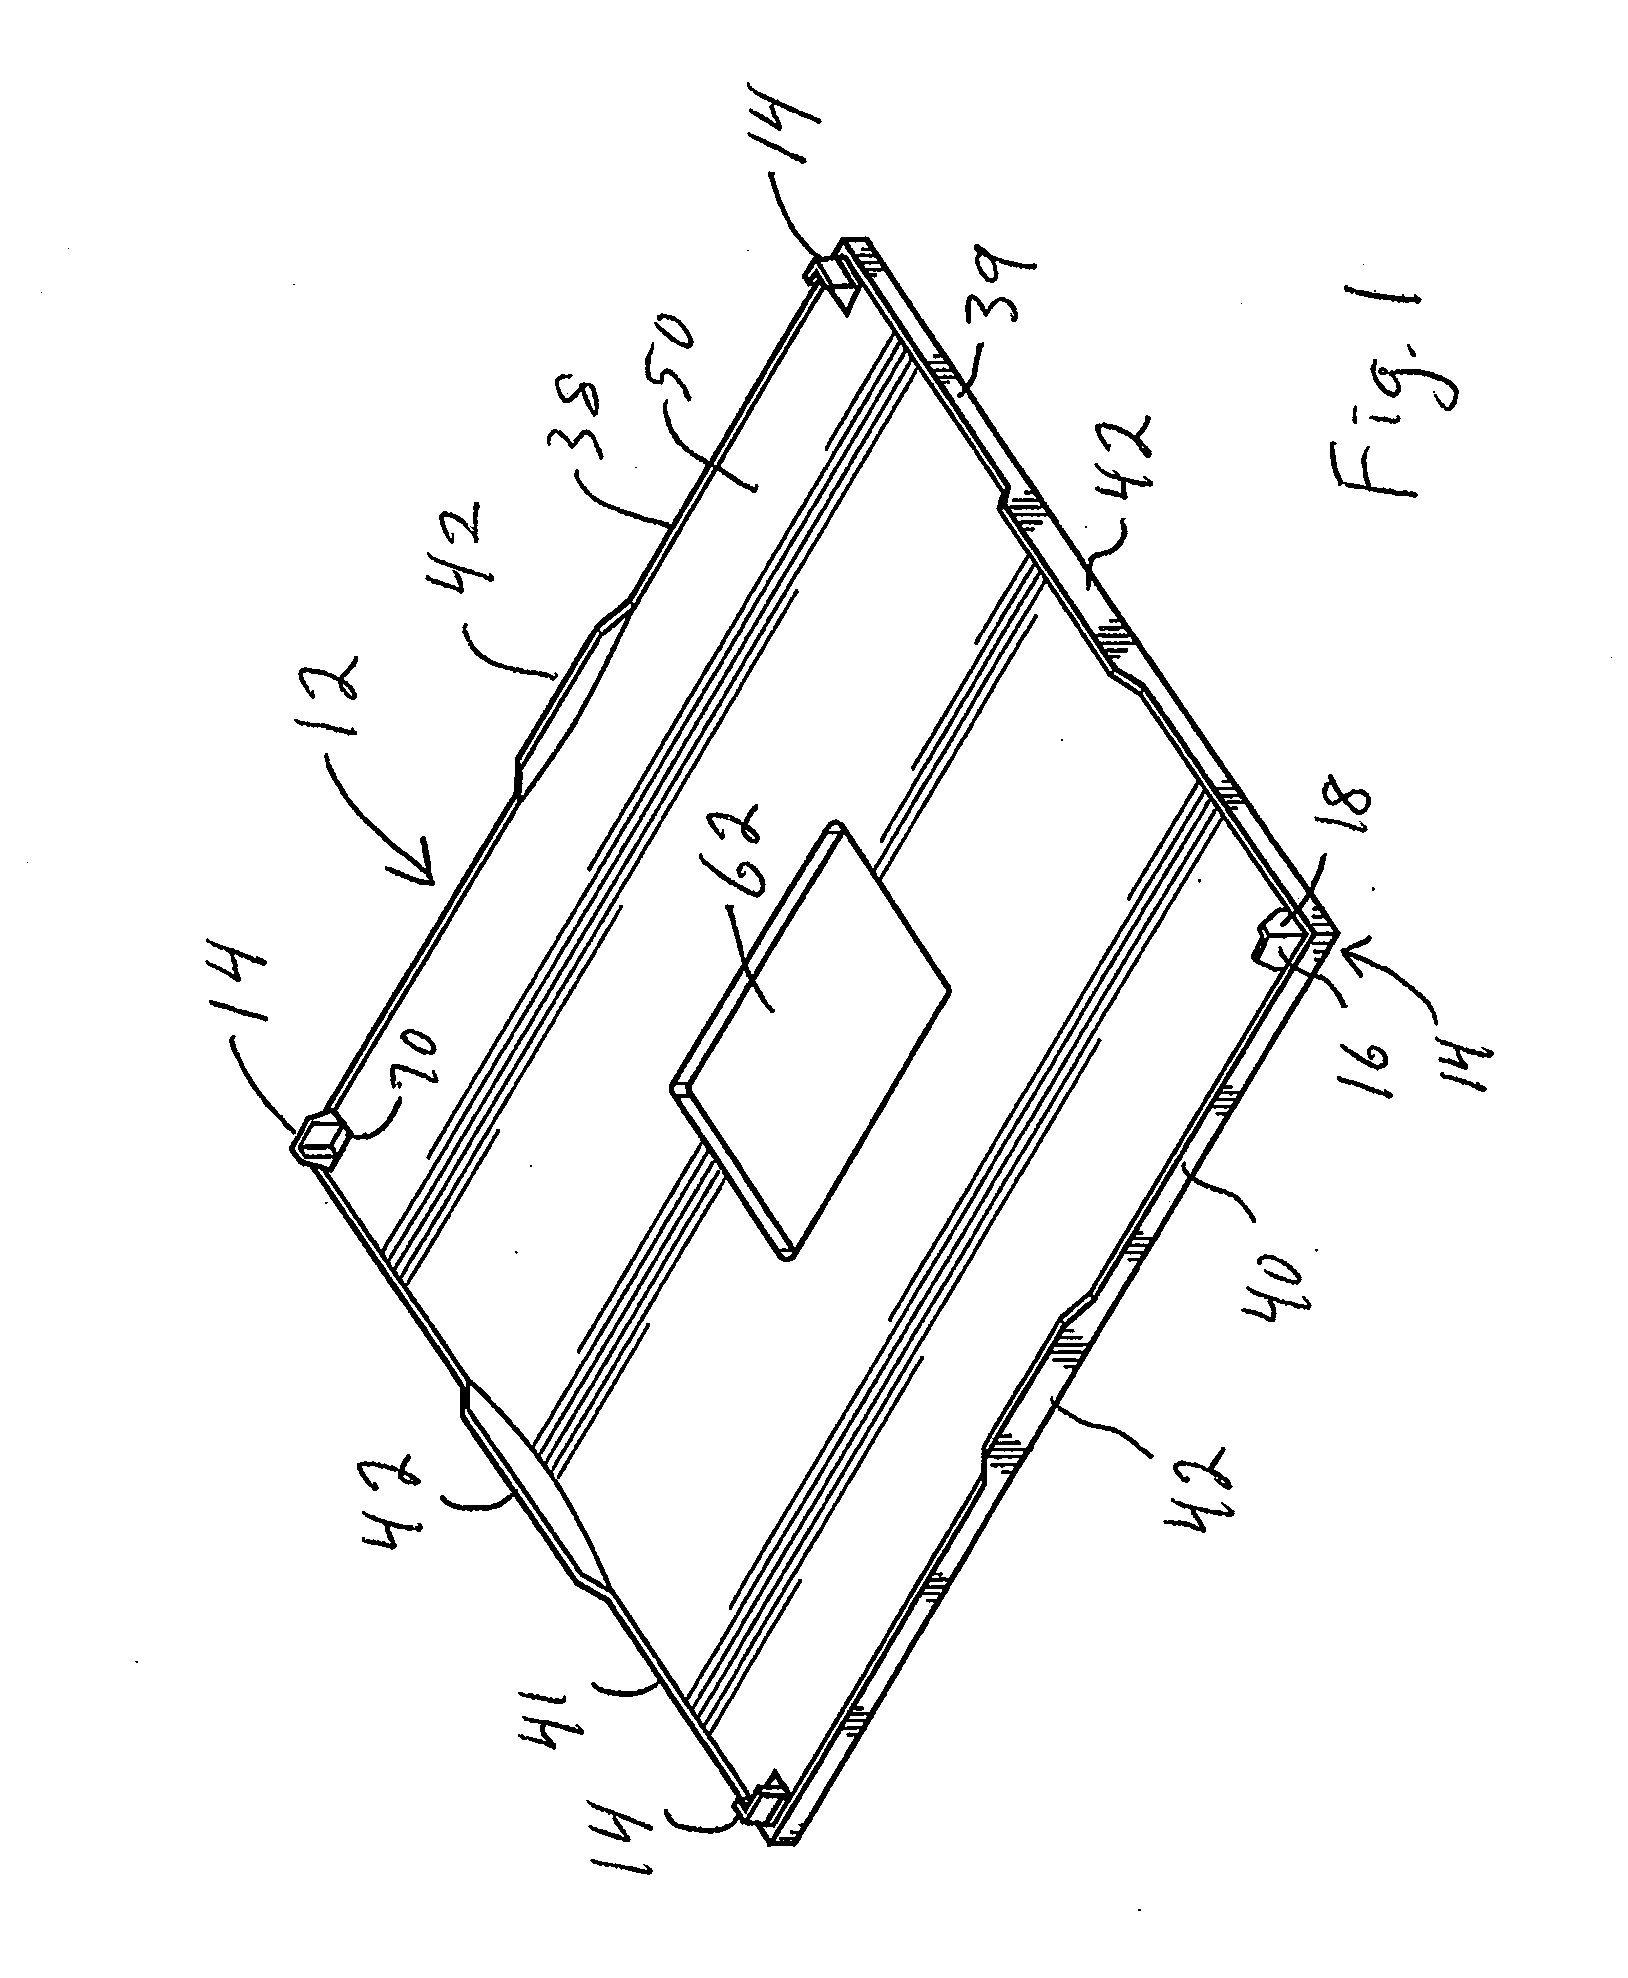 Reusable, Combined Multi-Part Product Shipping Box and Display Tray